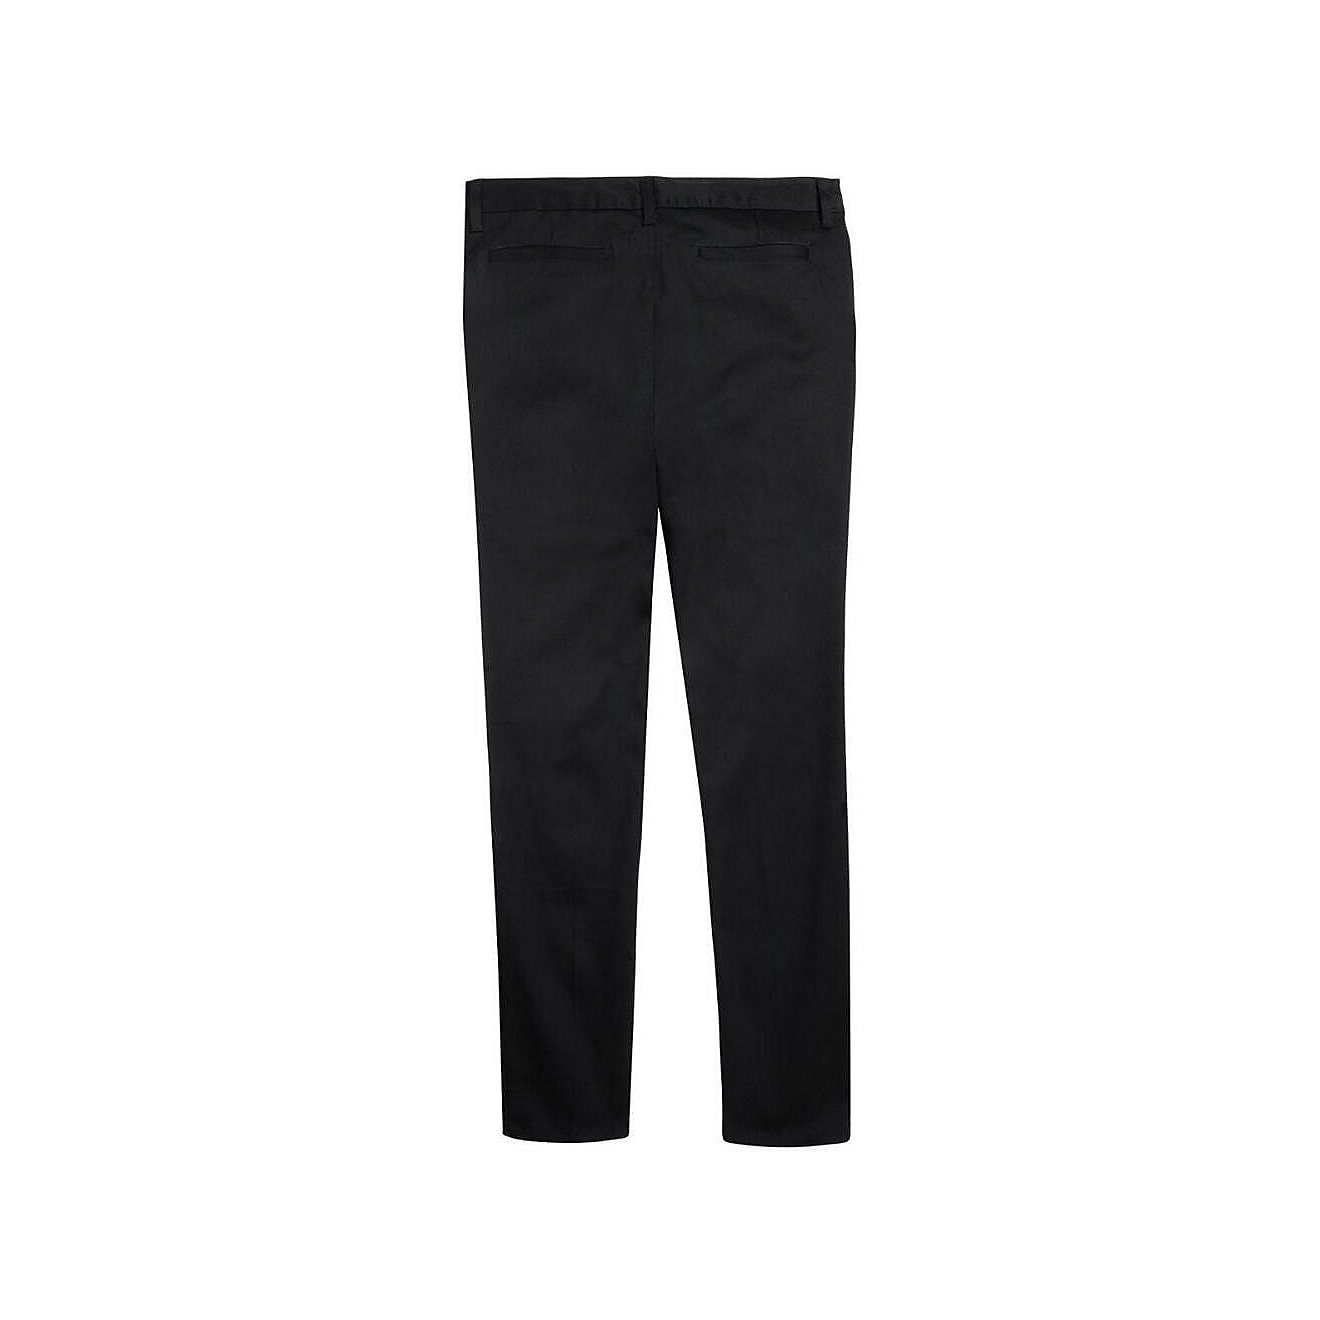 French Toast Girls' Extended Sizing Skinny Stretch Twill Pant | Academy